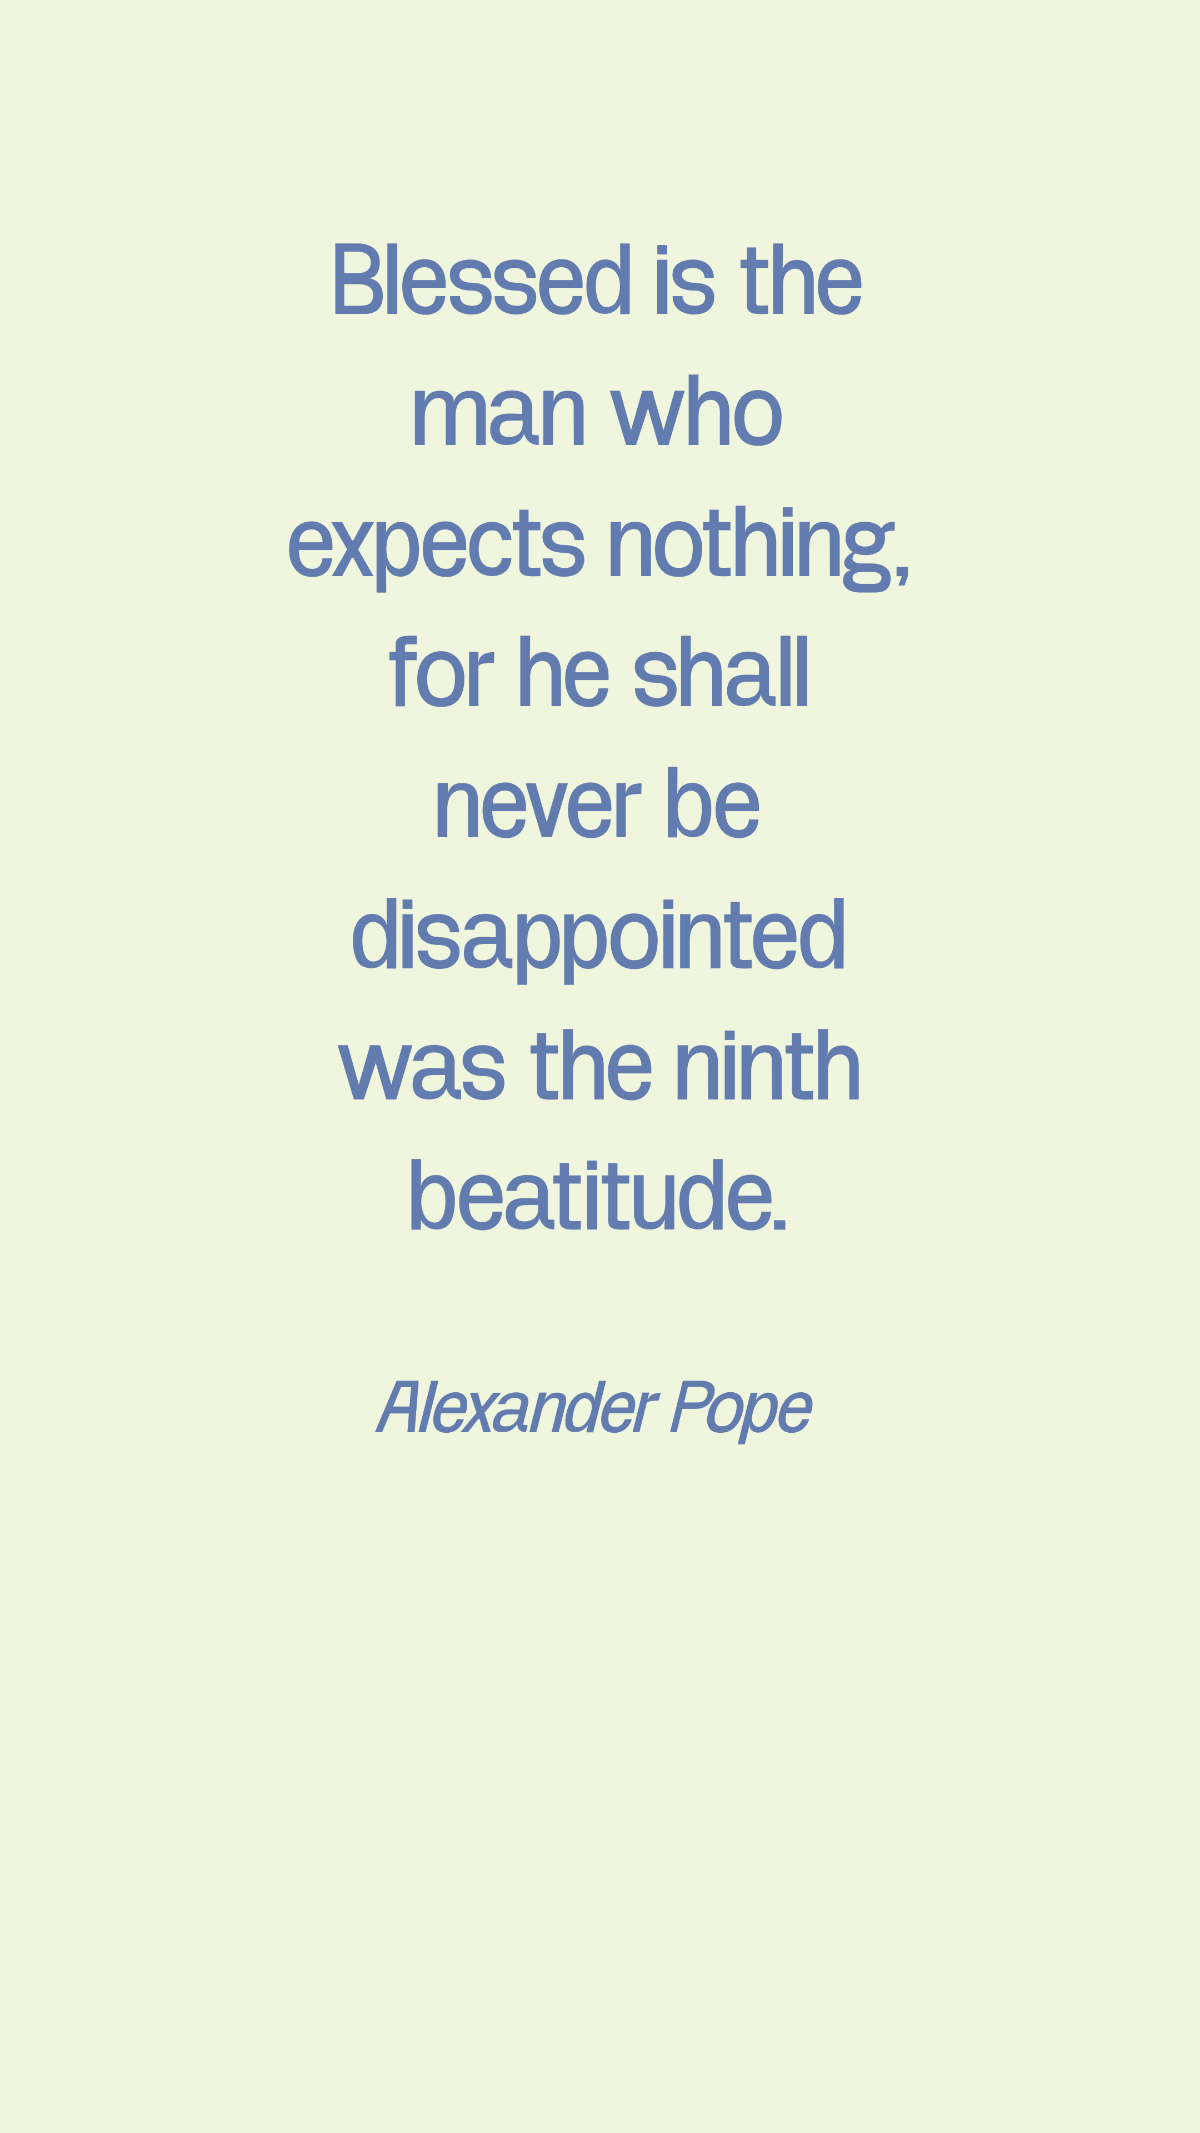 Free Alexander Pope - Blessed is the man who expects nothing, for he shall never be disappointed was the ninth beatitude. Template